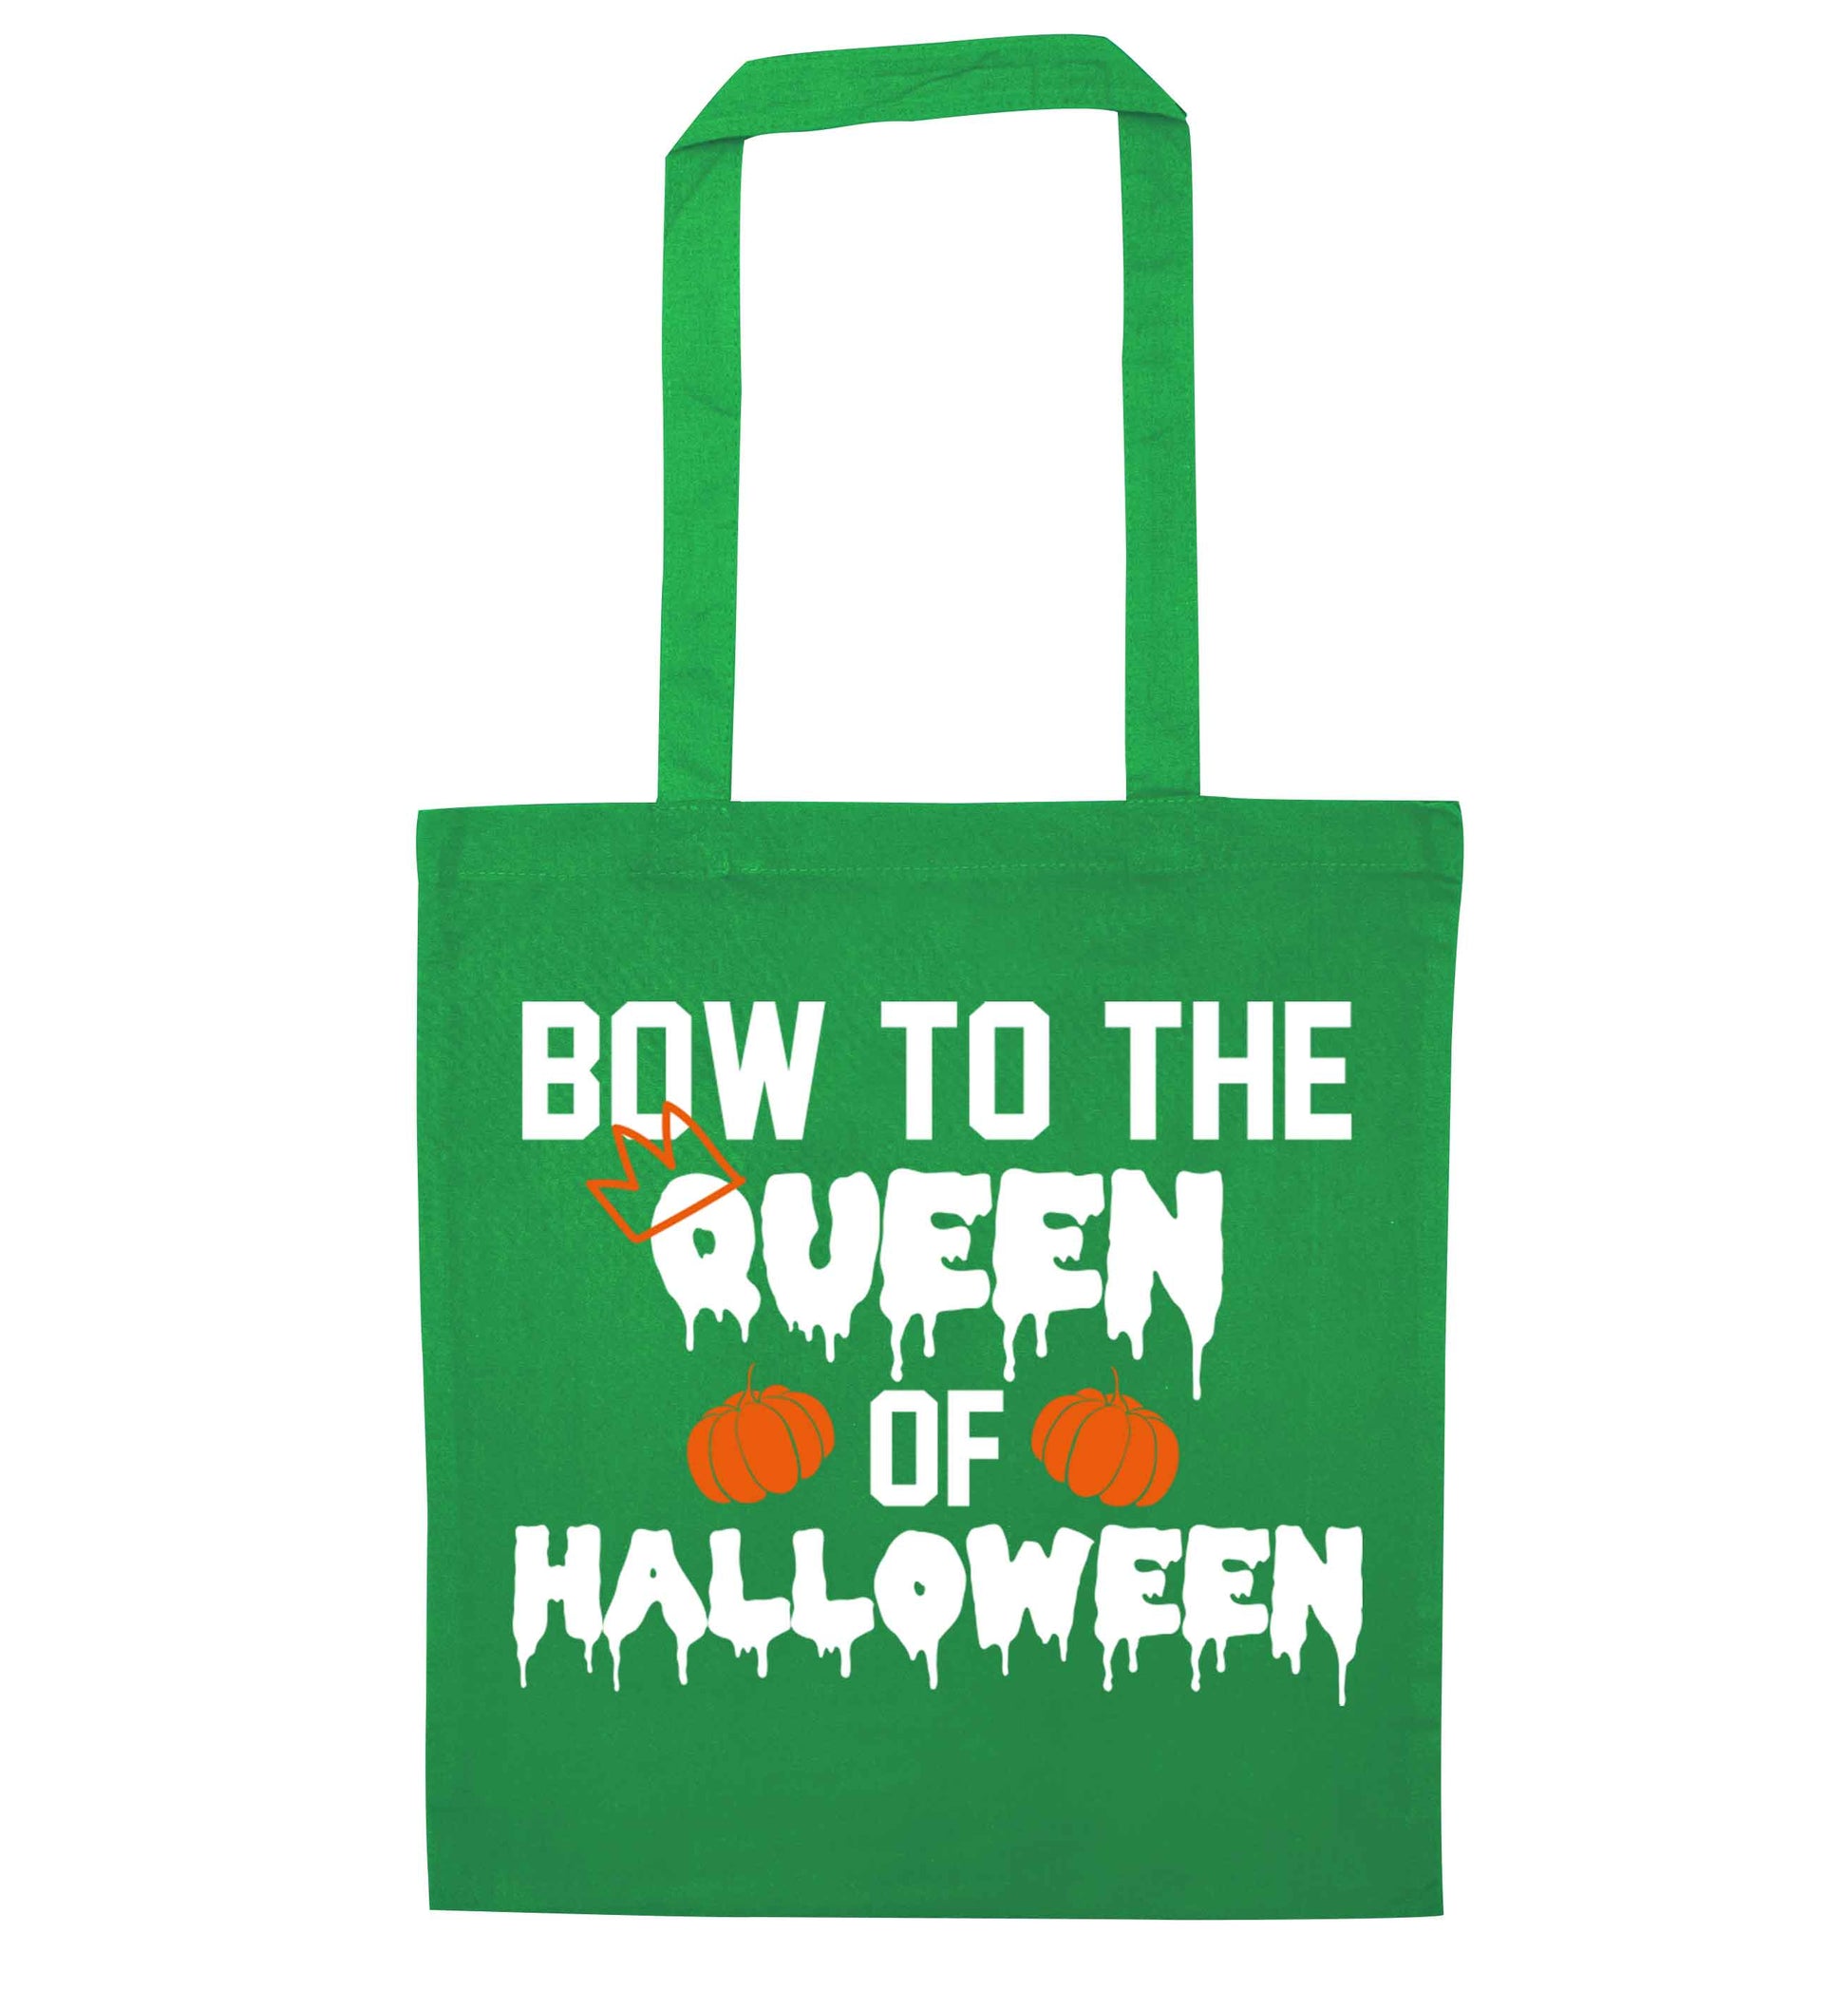 Bow to the Queen of halloween green tote bag